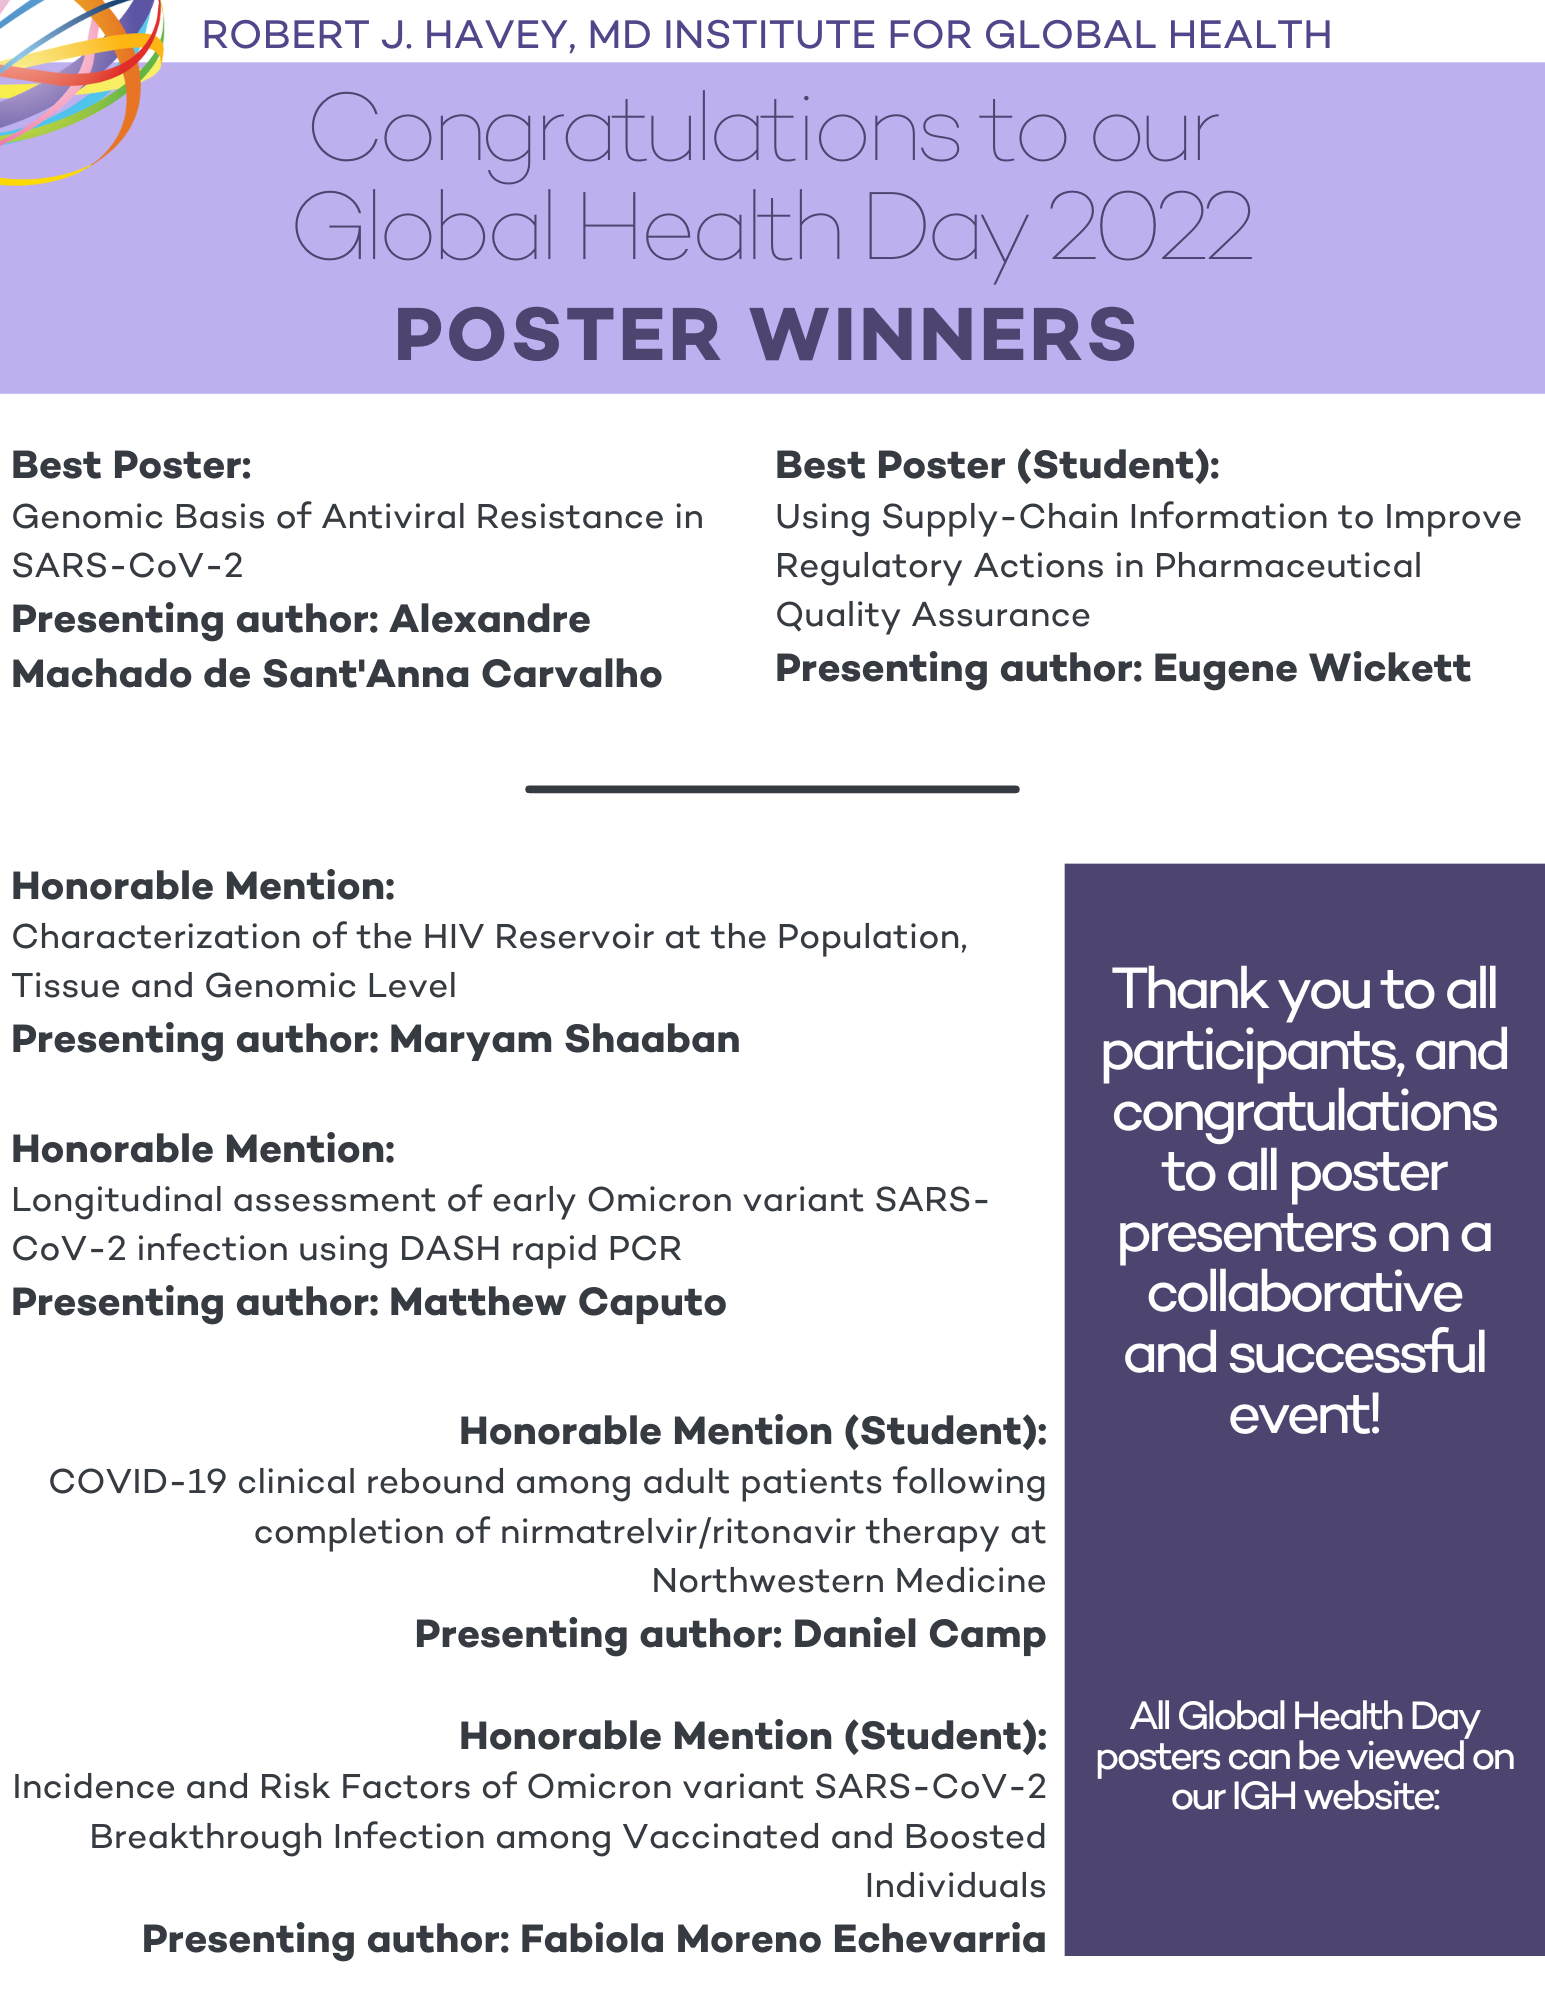 ghd_22_poster-winners_for-website-2.png